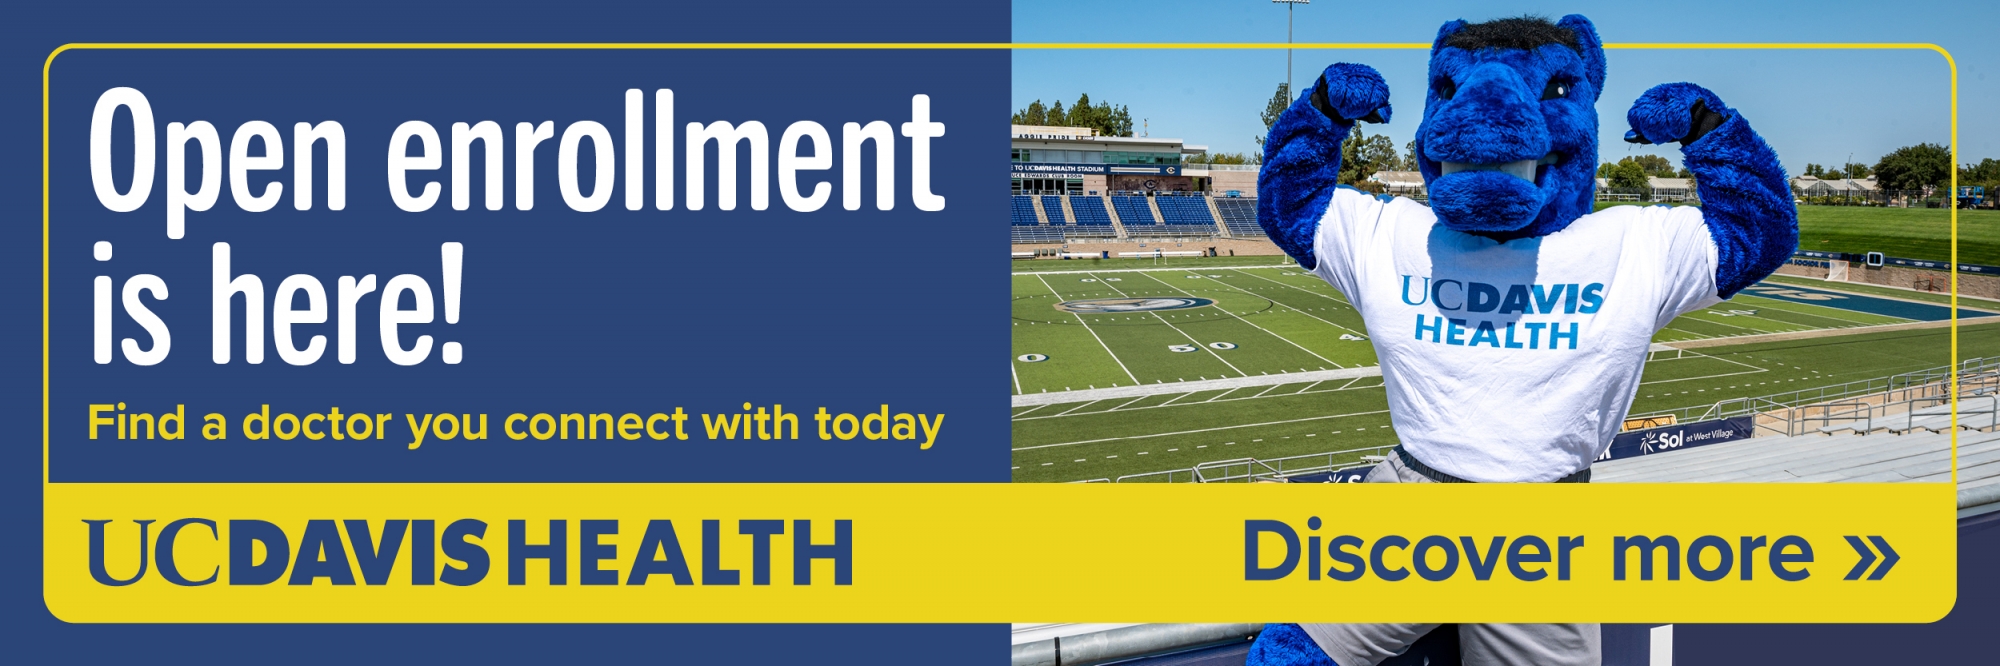 Open enrollment is here! Find a doctor you connect with today; UC Davis Health; Discover more